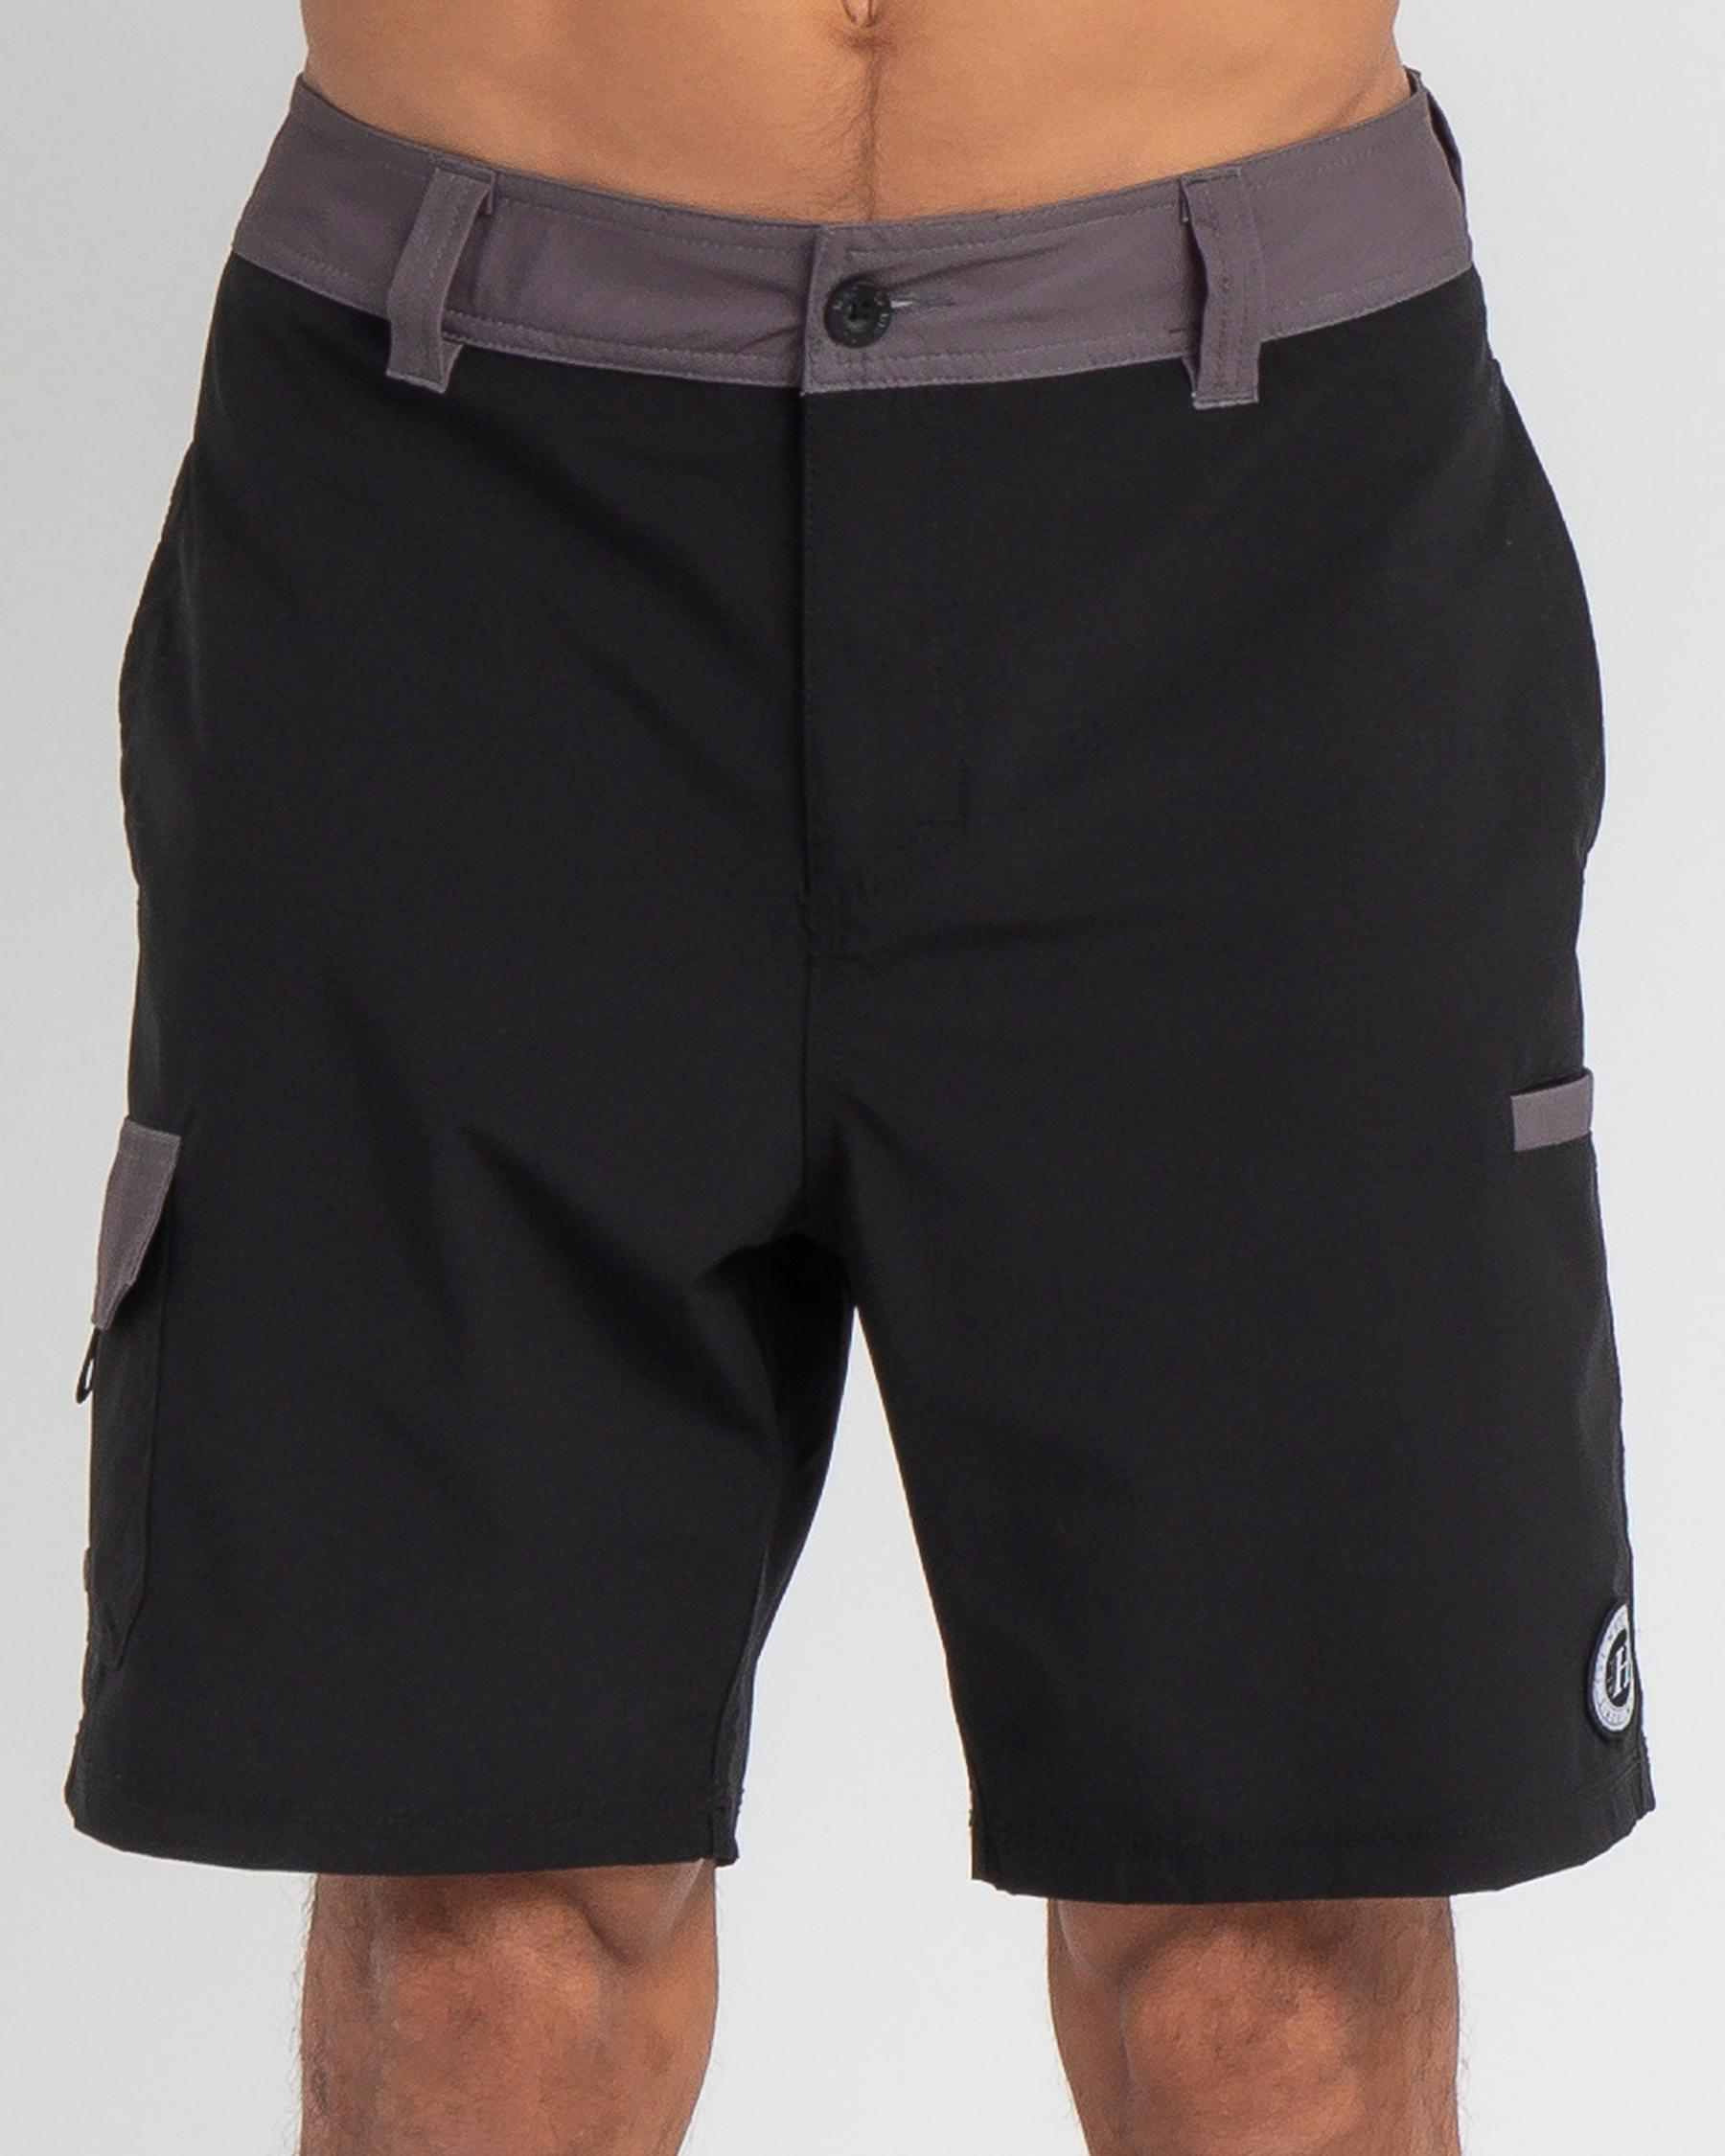 Shop The Mad Hueys Cross Breed Hybrid Shorts In Black - Fast Shipping ...